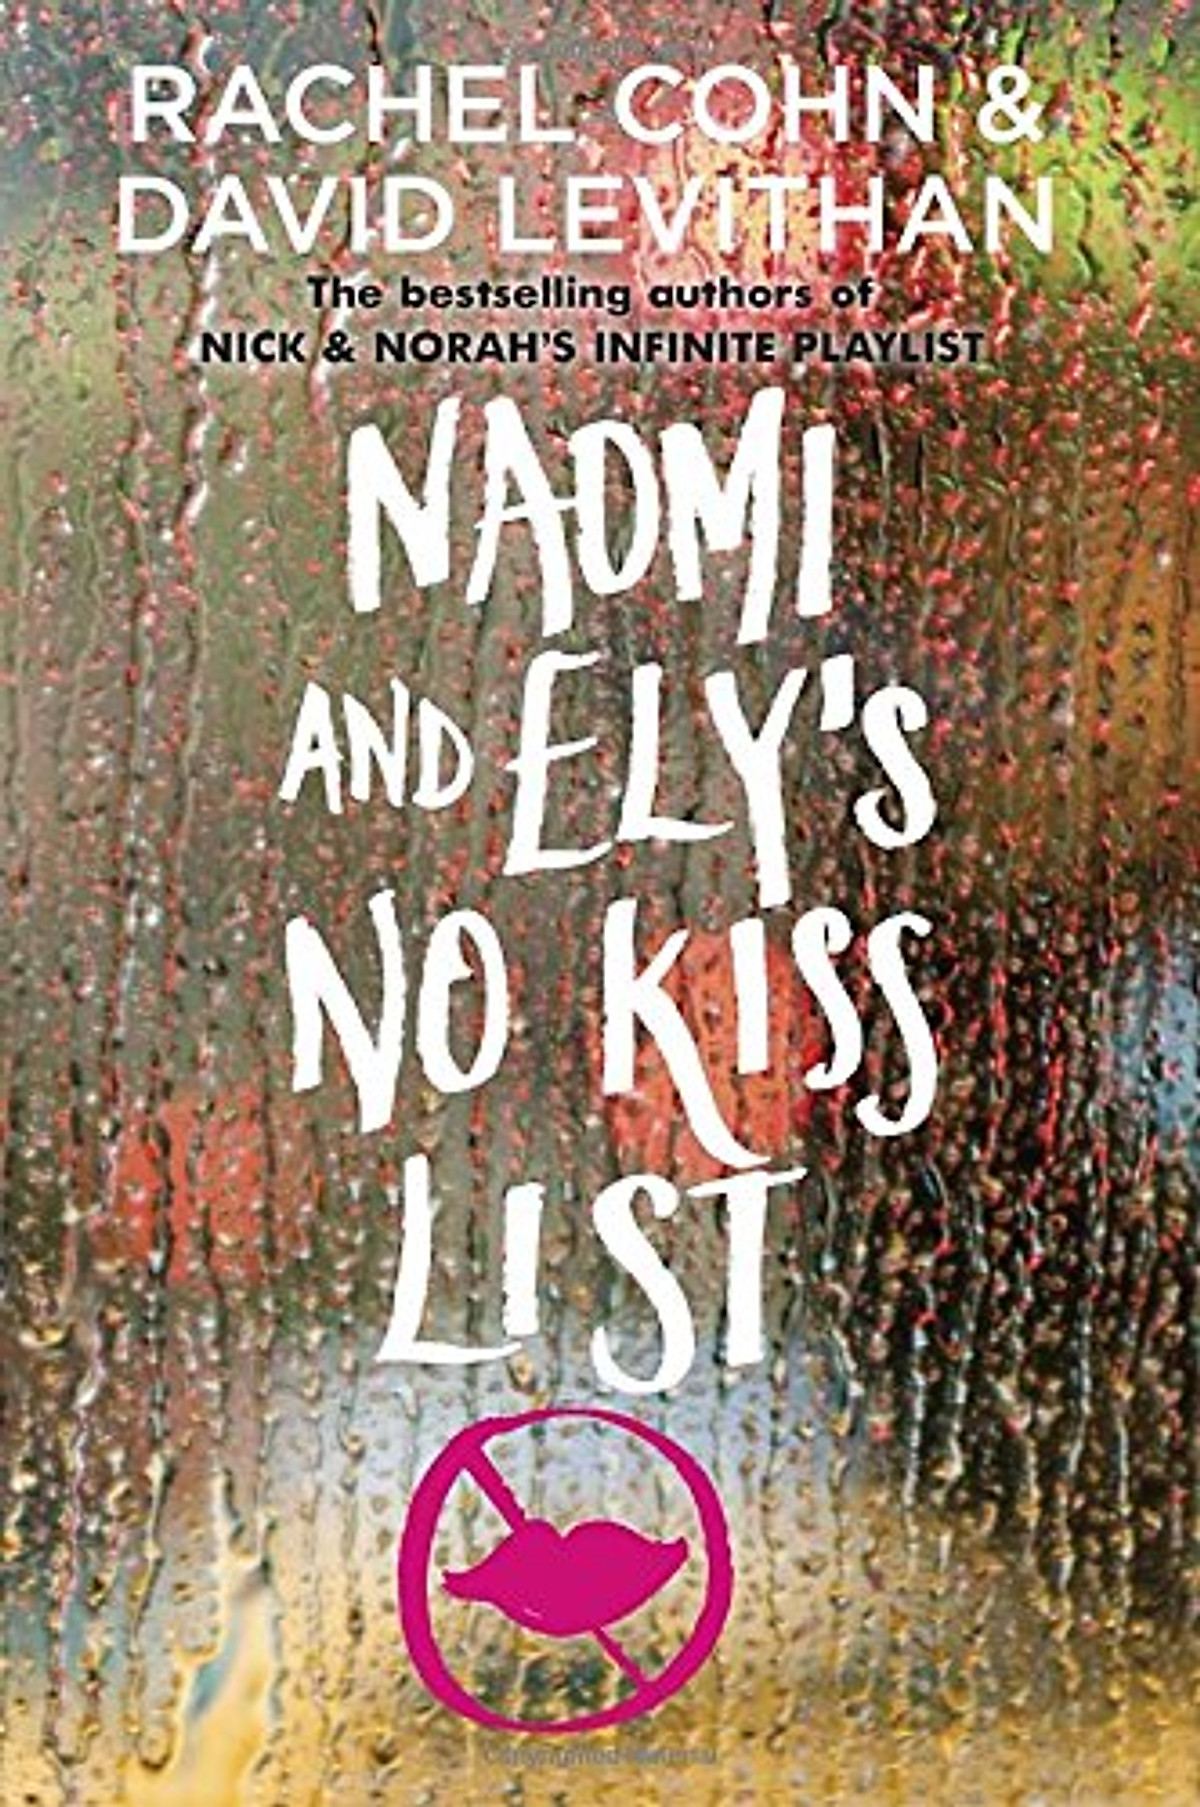 Naomi And Ely’s No Kiss List